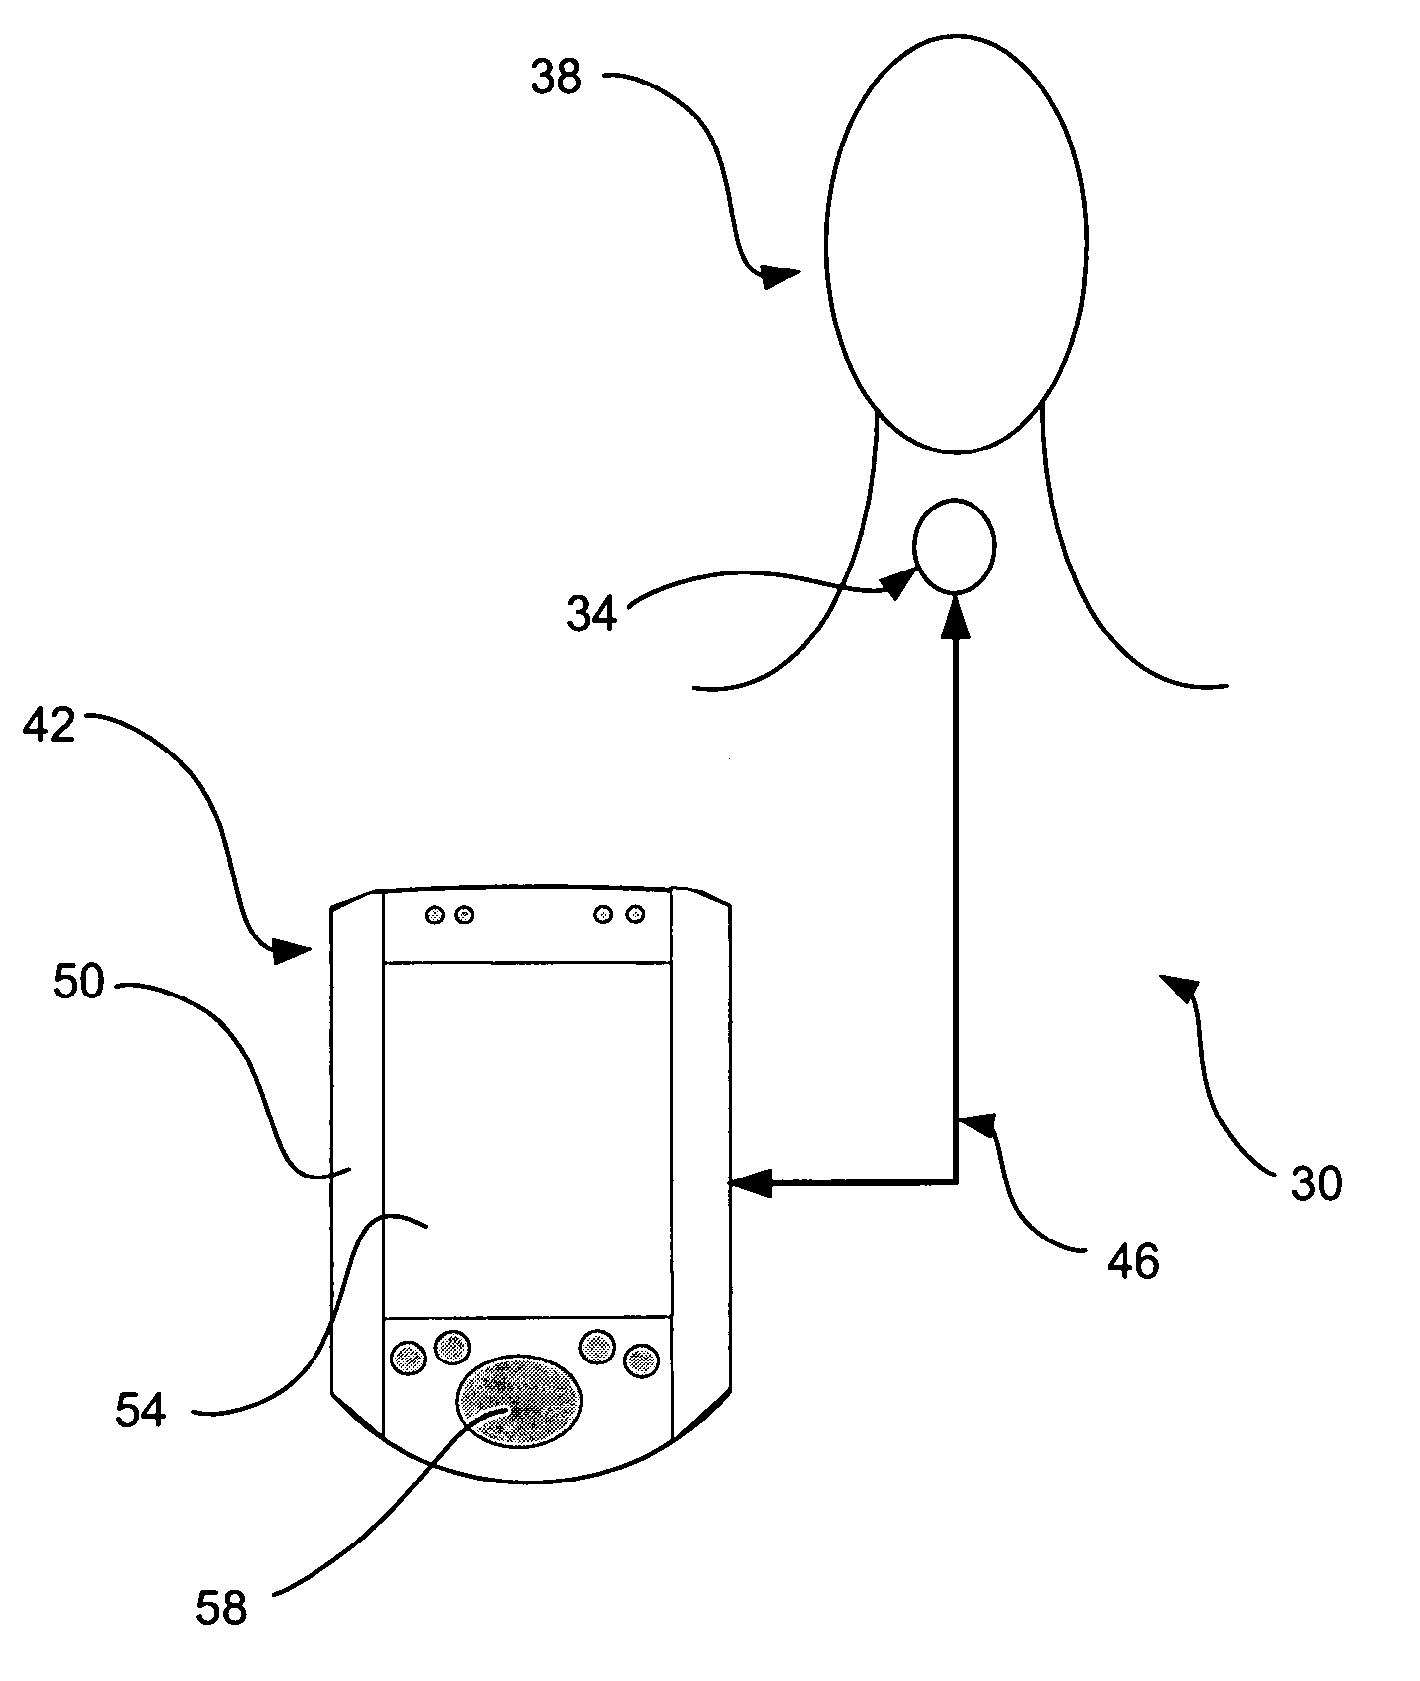 Apparatus and method for detecting aspiration